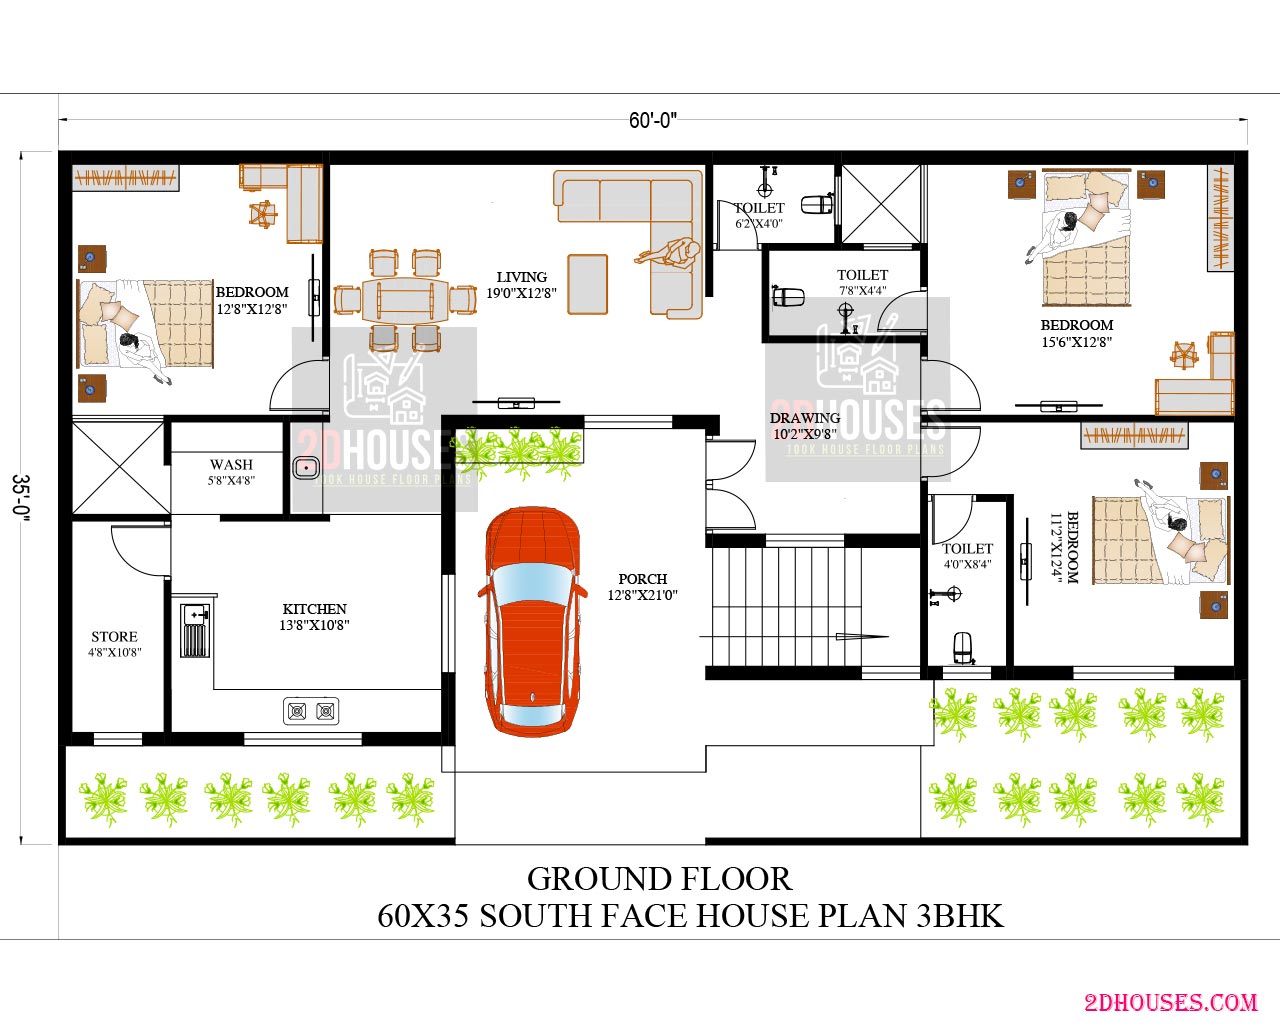 South facing 60 x 35 house plans 3bhk